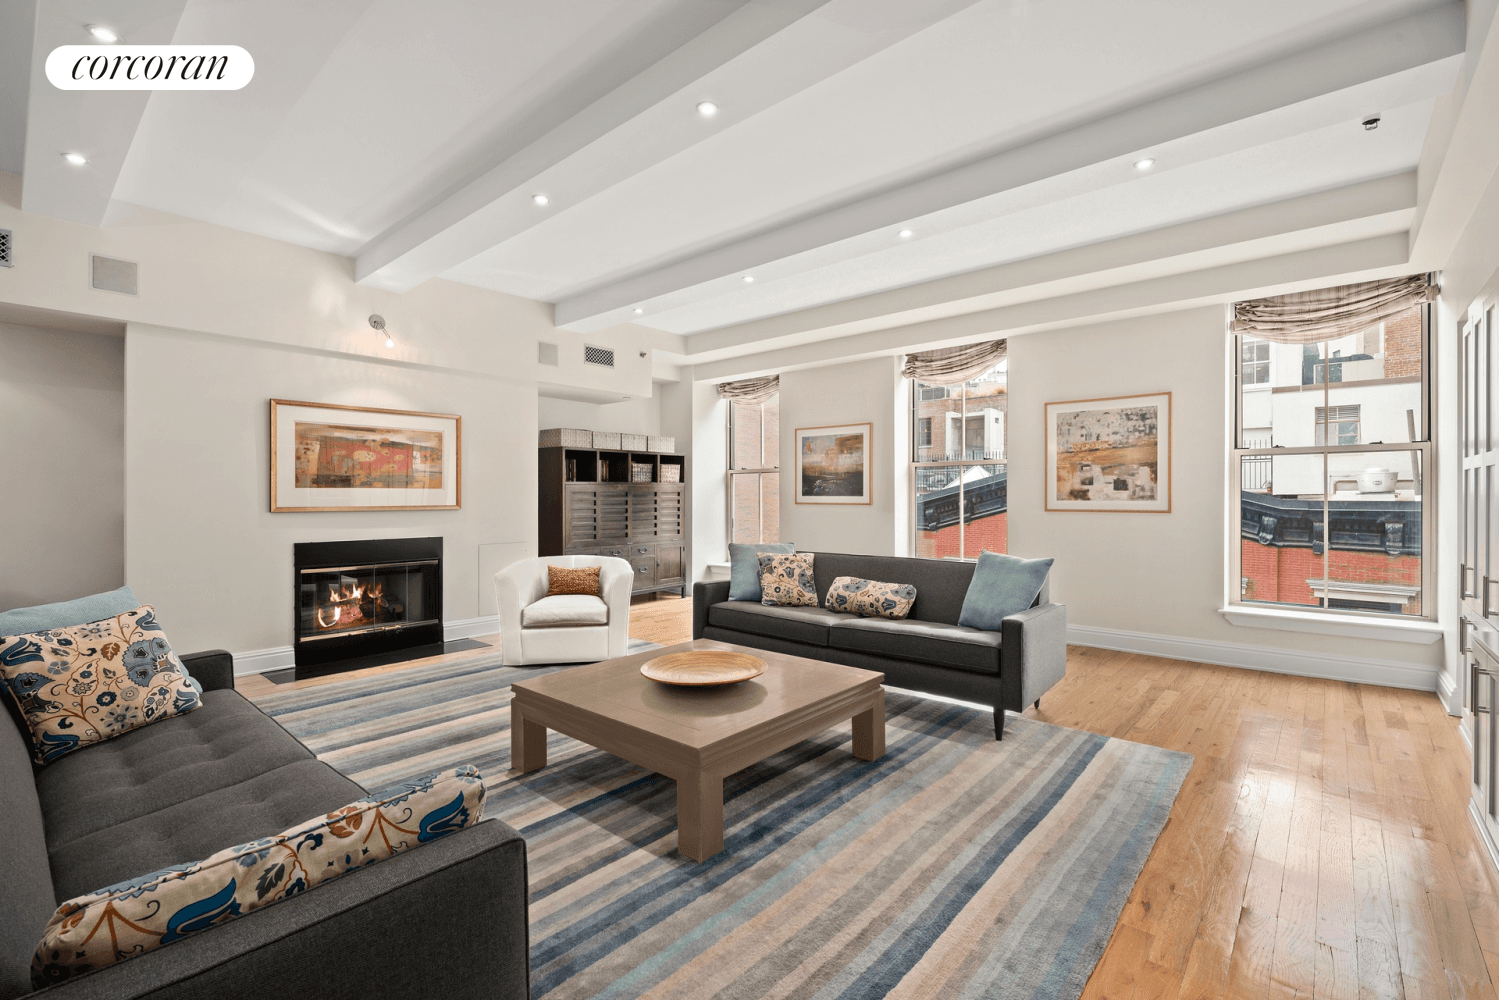 Spectacular, turnkey loft living awaits in this 25 foot wide beautifully updated designer residence featuring two large bedrooms, two bathrooms and an expansive open layout perfect for relaxing and entertaining ...